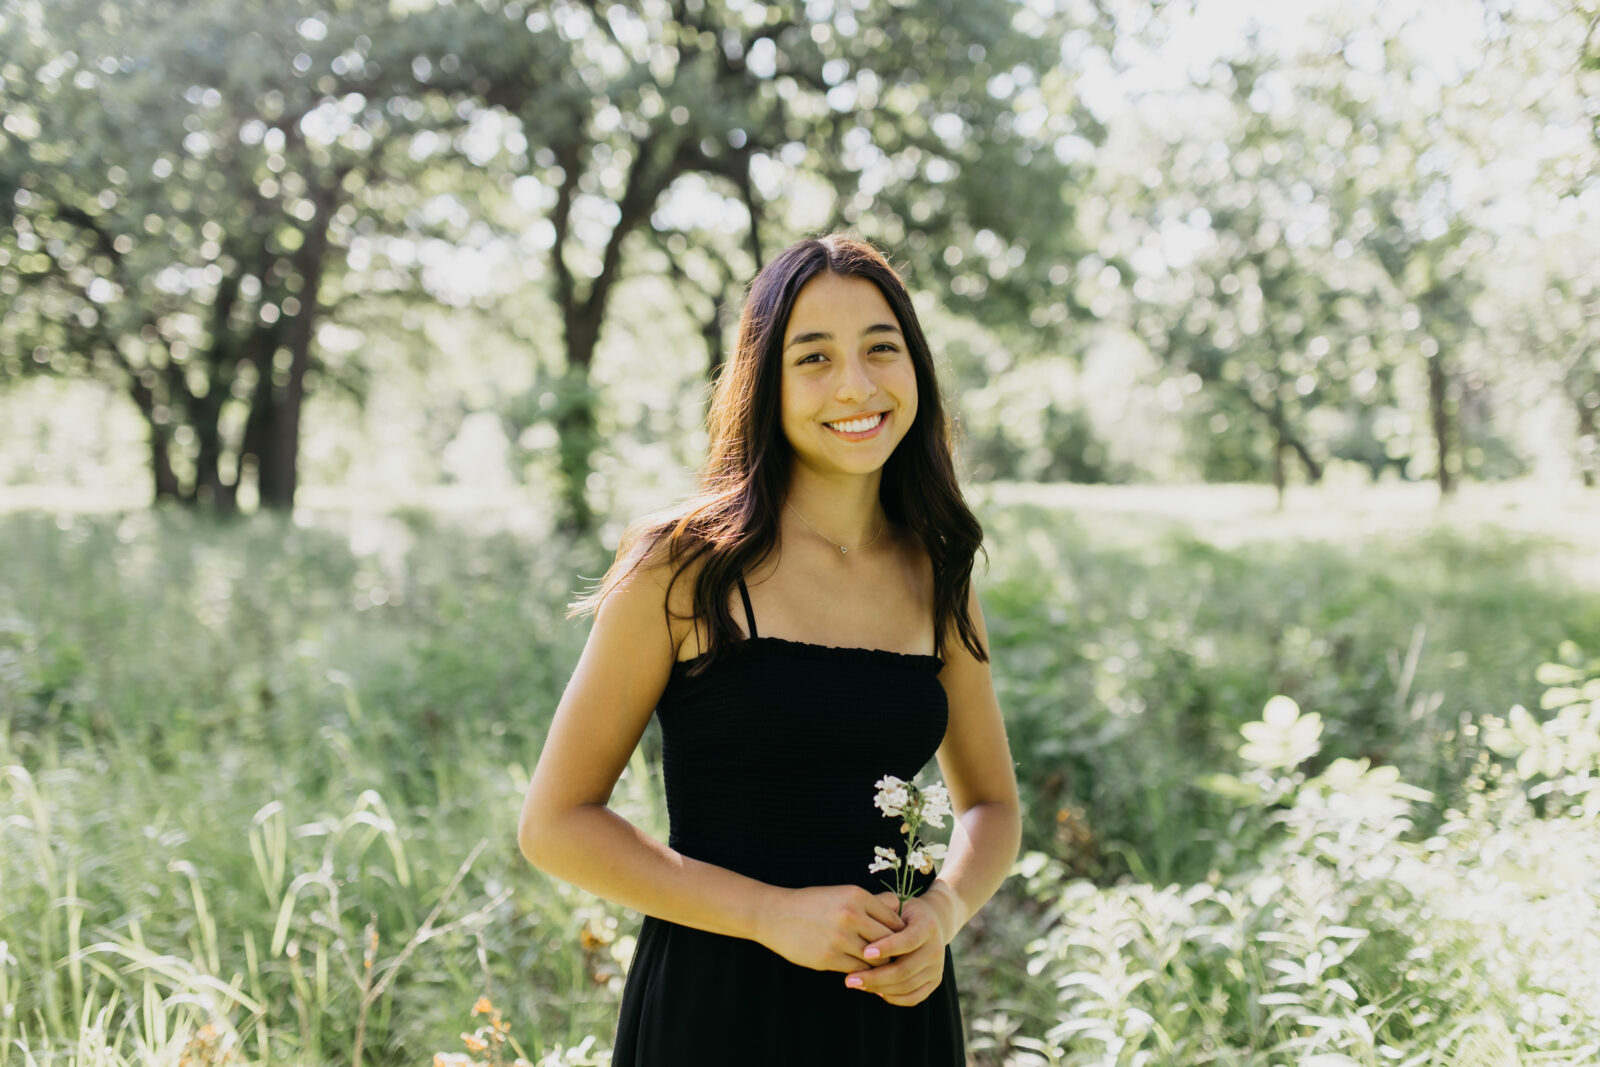 A smiling high school senior in her black dress captured against a backdrop of nature in a photograph.